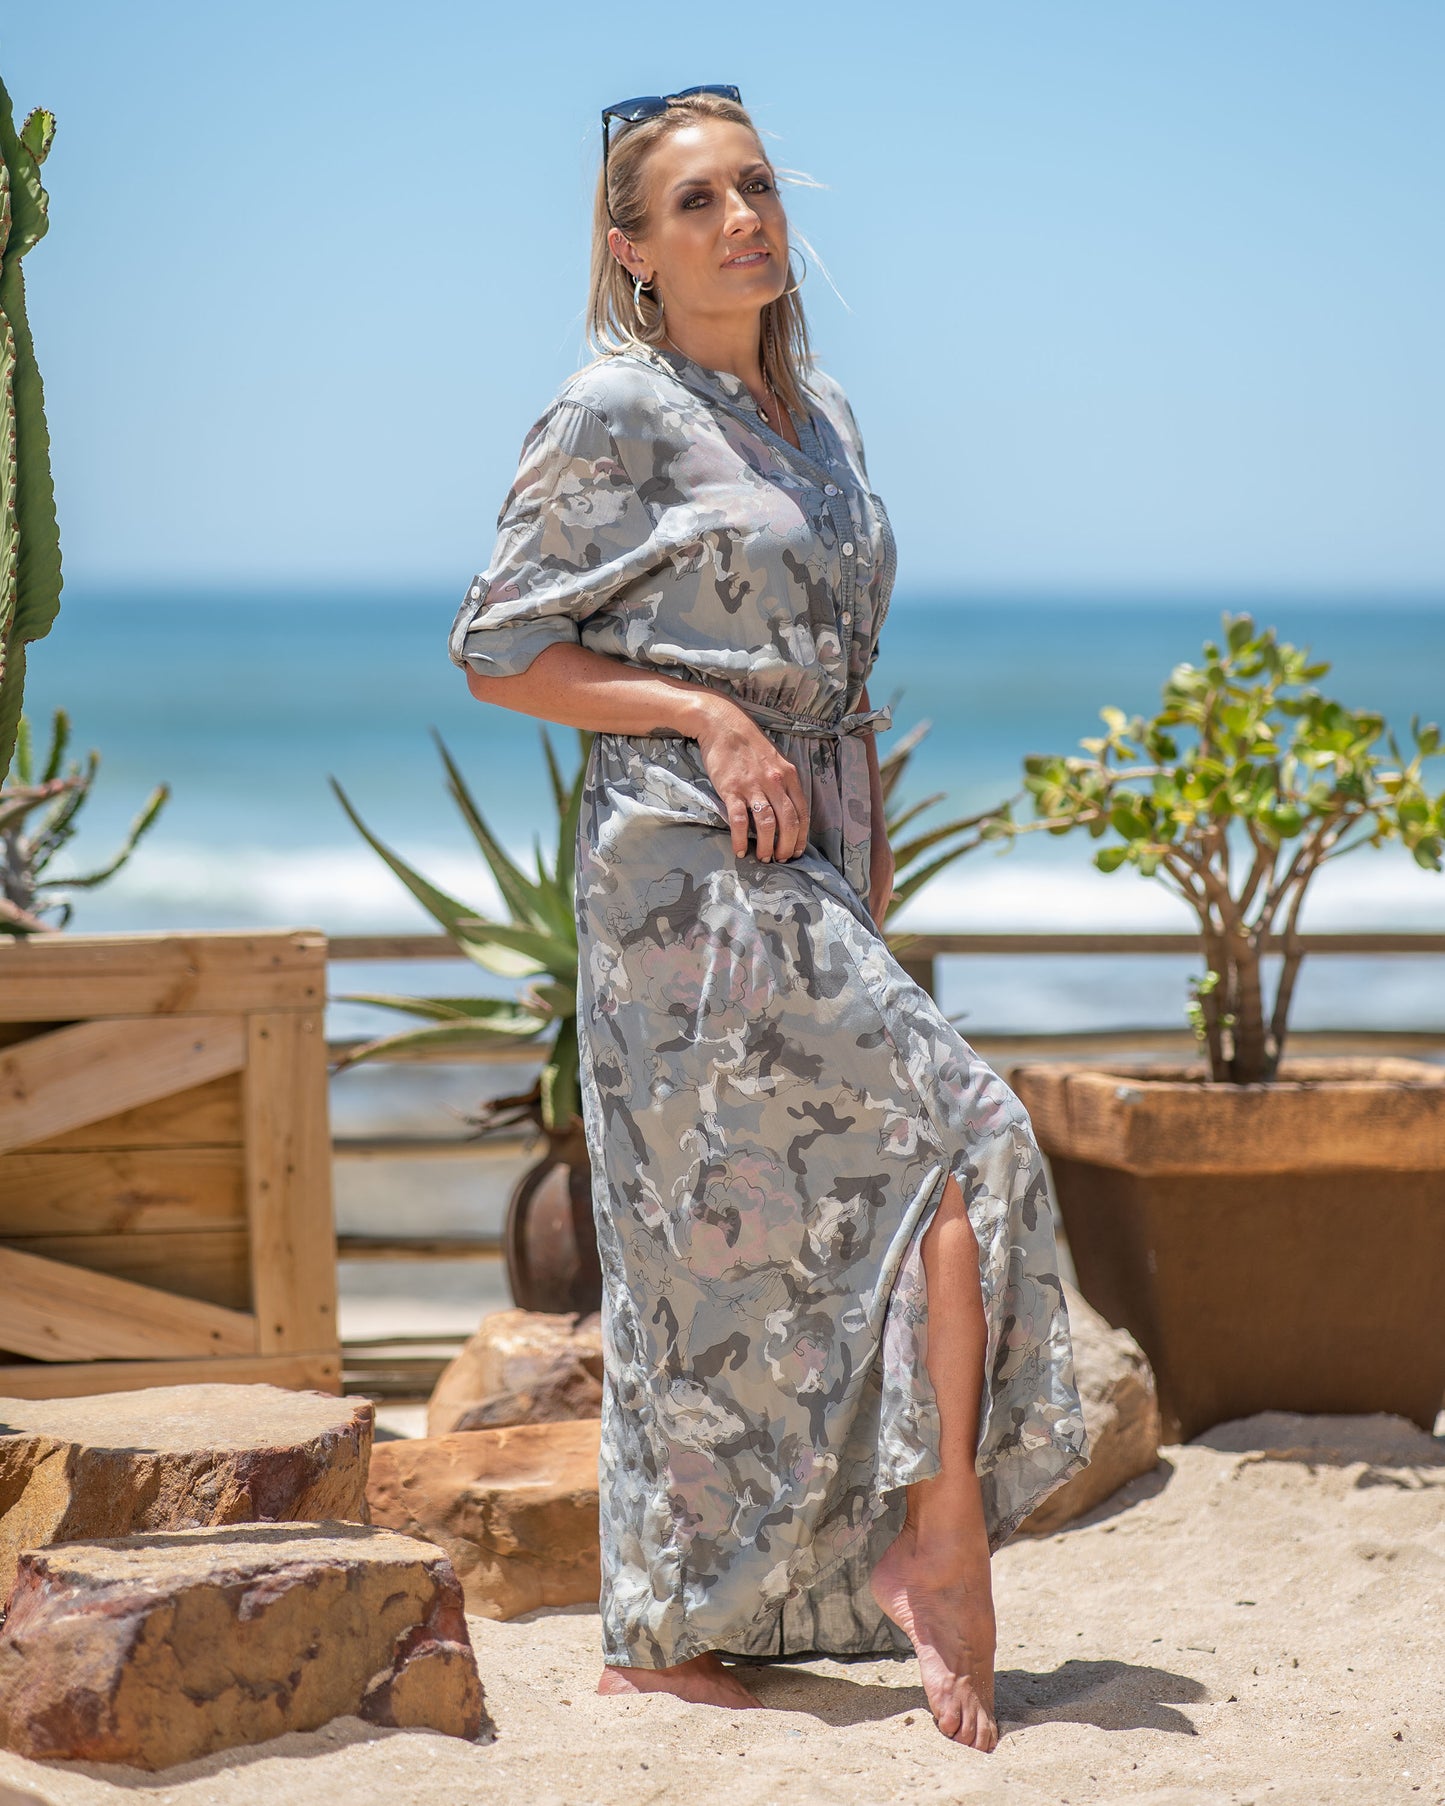 Where comfort meets sophistication in the most effortless way possible. The maxi length of this dress offers a versatile silhouette that is both chic and comfortable, making it suitable for various occasions